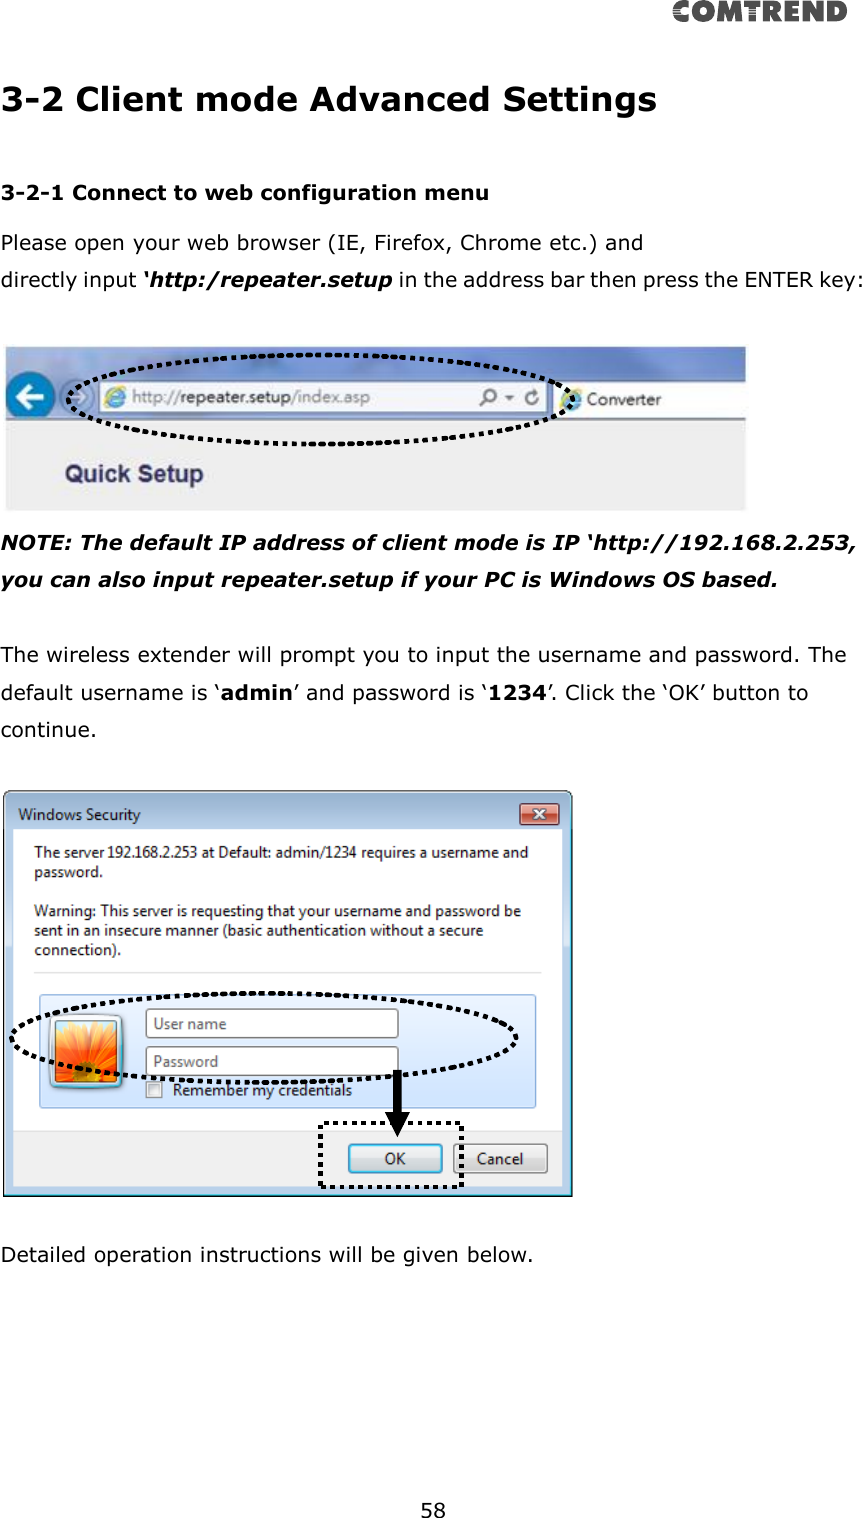       58  3-2 Client mode Advanced Settings  3-2-1 Connect to web configuration menu Please open your web browser (IE, Firefox, Chrome etc.) and   directly input ‘http:/repeater.setup in the address bar then press the ENTER key:   NOTE: The default IP address of client mode is IP ‘http://192.168.2.253, you can also input repeater.setup if your PC is Windows OS based.  The wireless extender will prompt you to input the username and password. The default username is ‘admin’ and password is ‘1234’. Click the ‘OK’ button to continue.    Detailed operation instructions will be given below.     